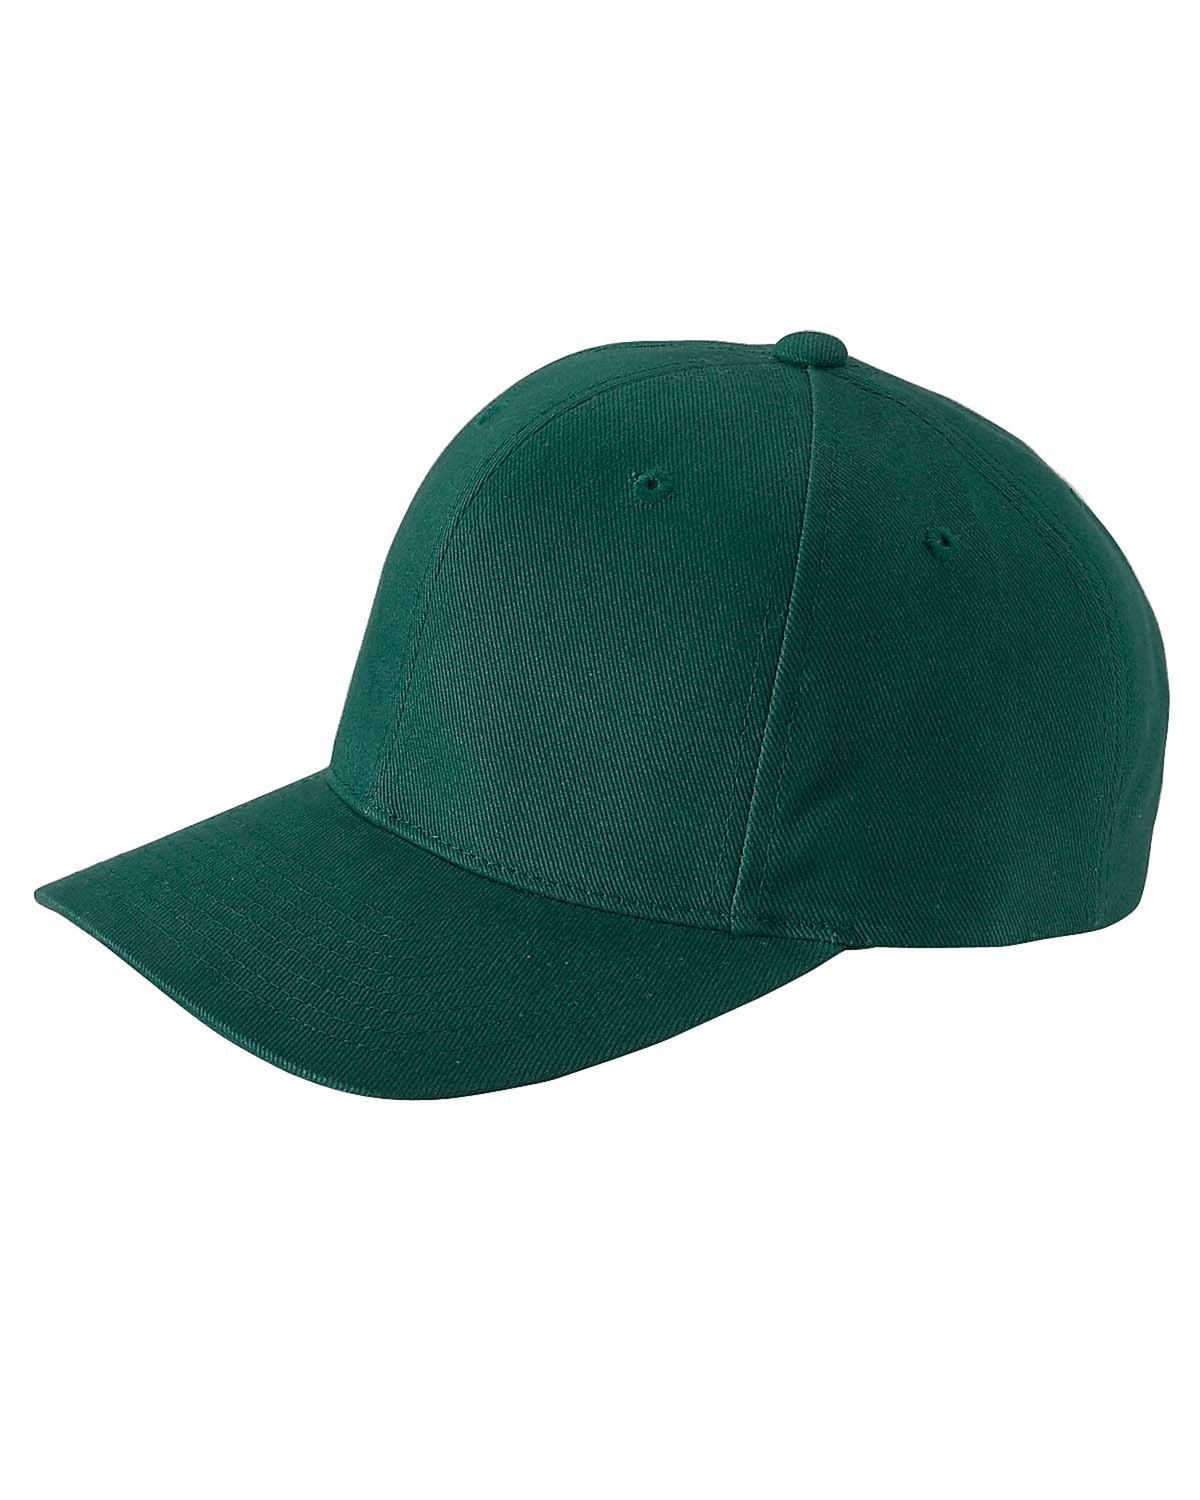 Yupoong 6363V  Brushed Cotton Twill Mid-Profile Cap